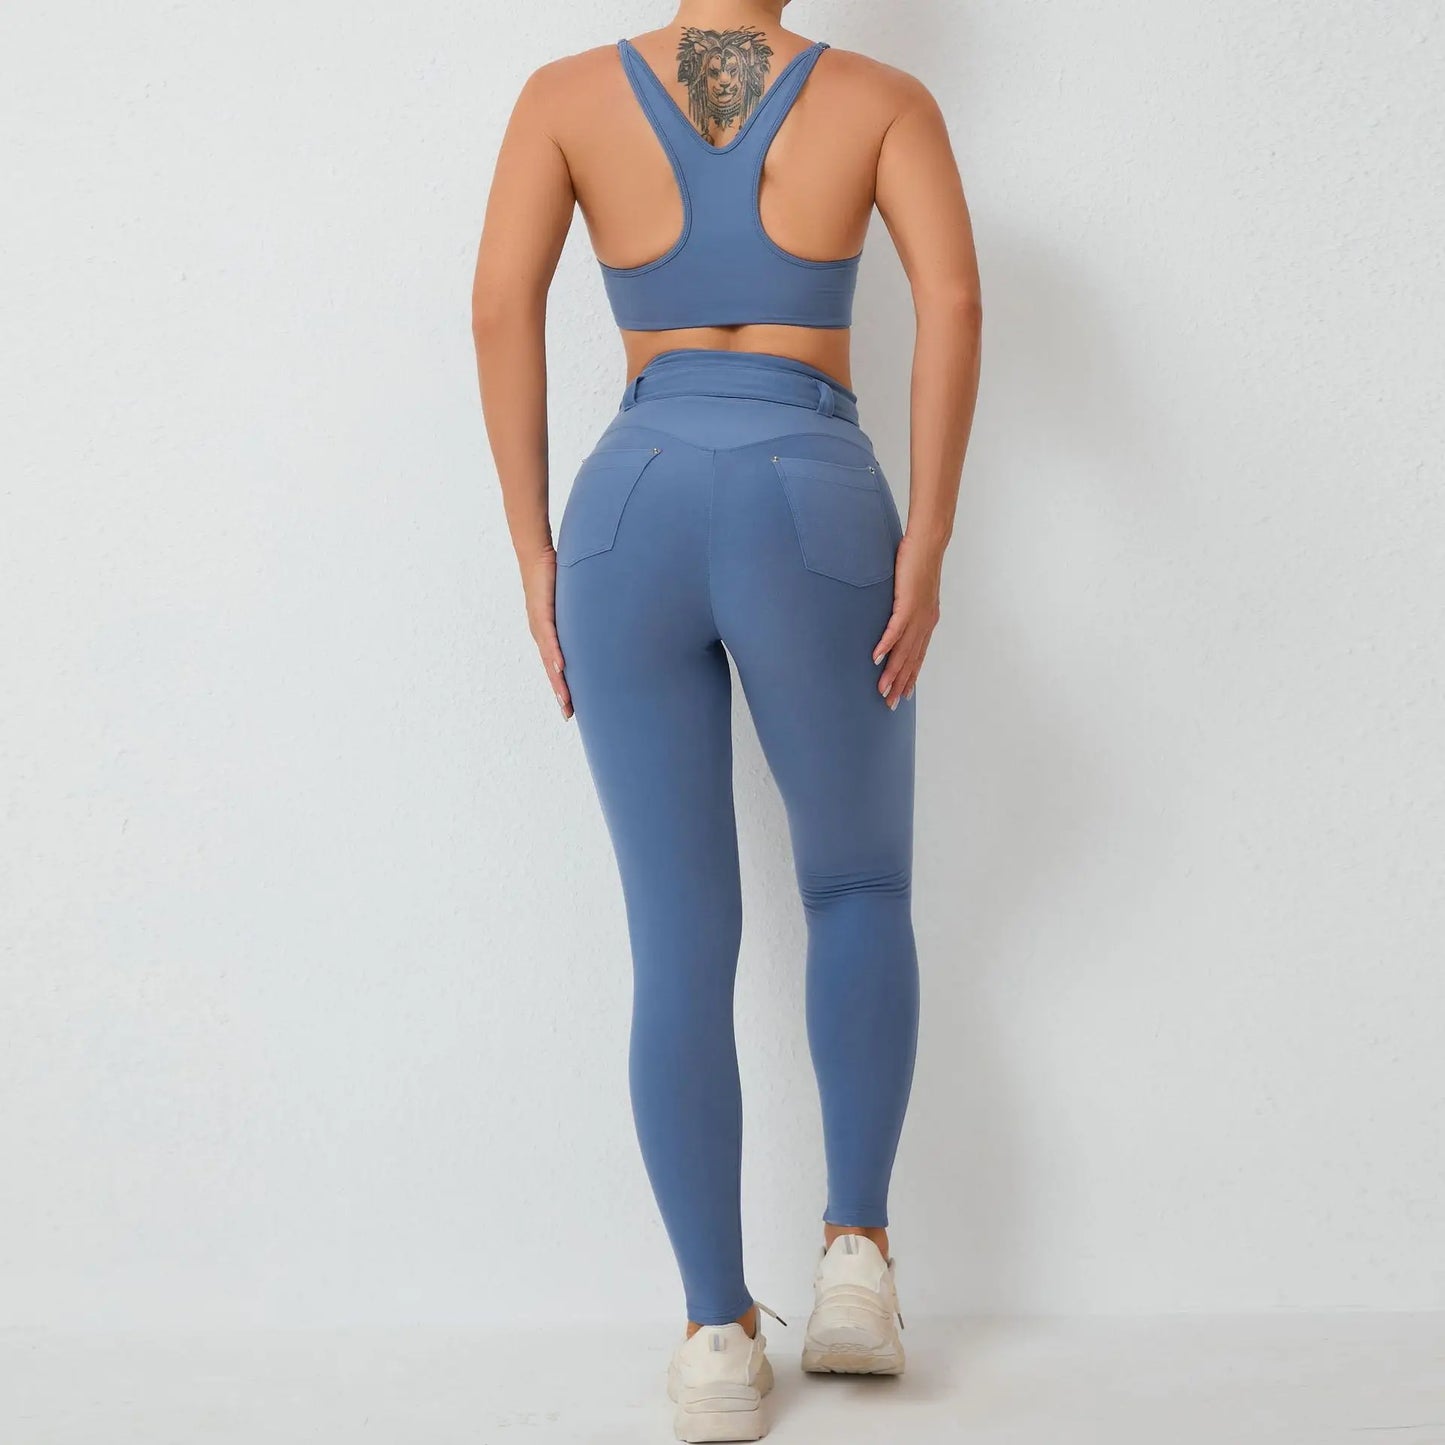 2 PIECE GYM SET WITH RACER BACK TOP AND BELTED PANTS